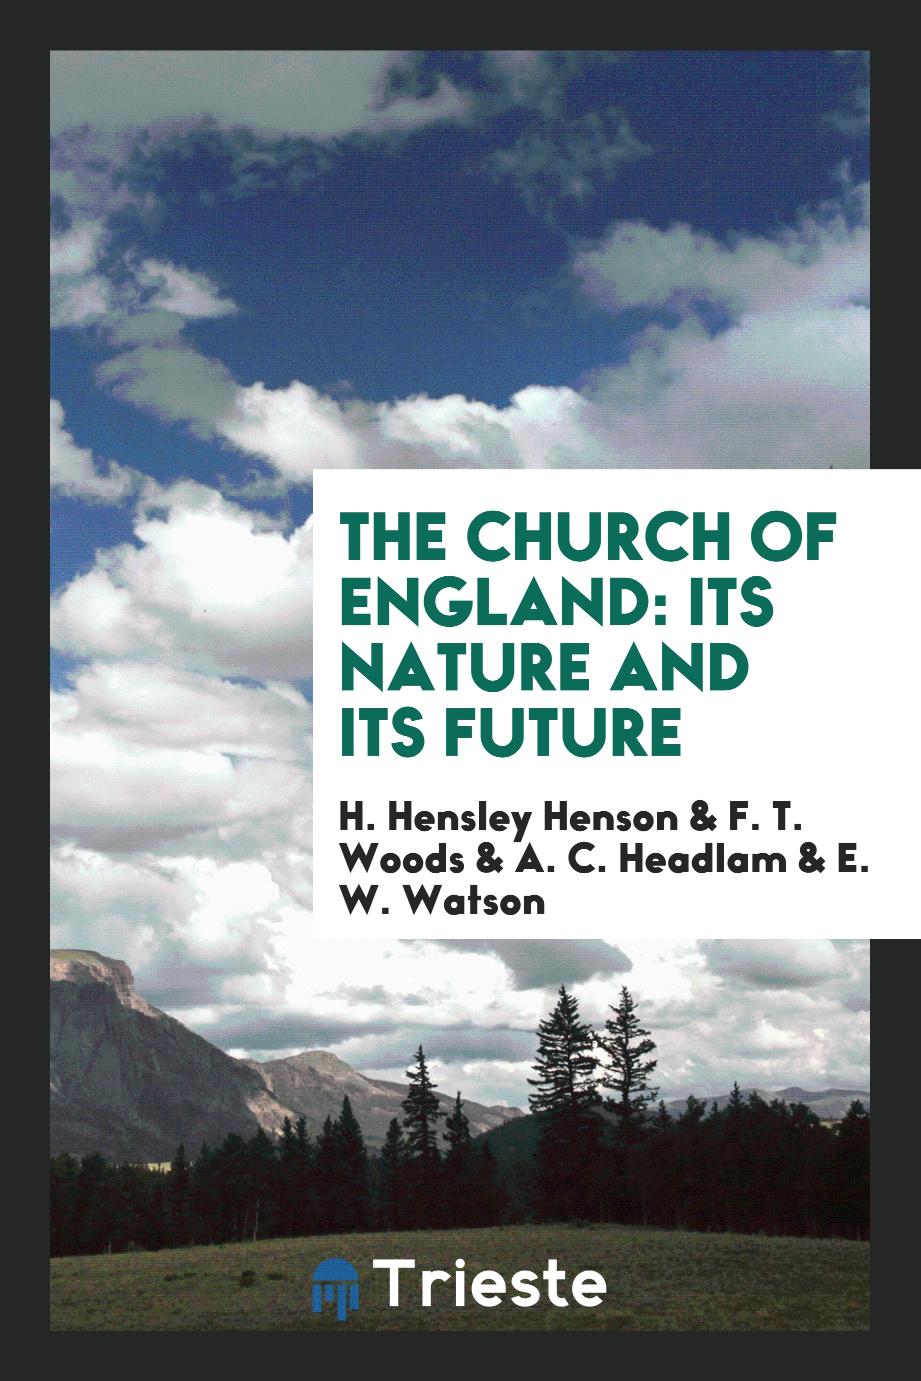 The Church of England: Its Nature and Its Future